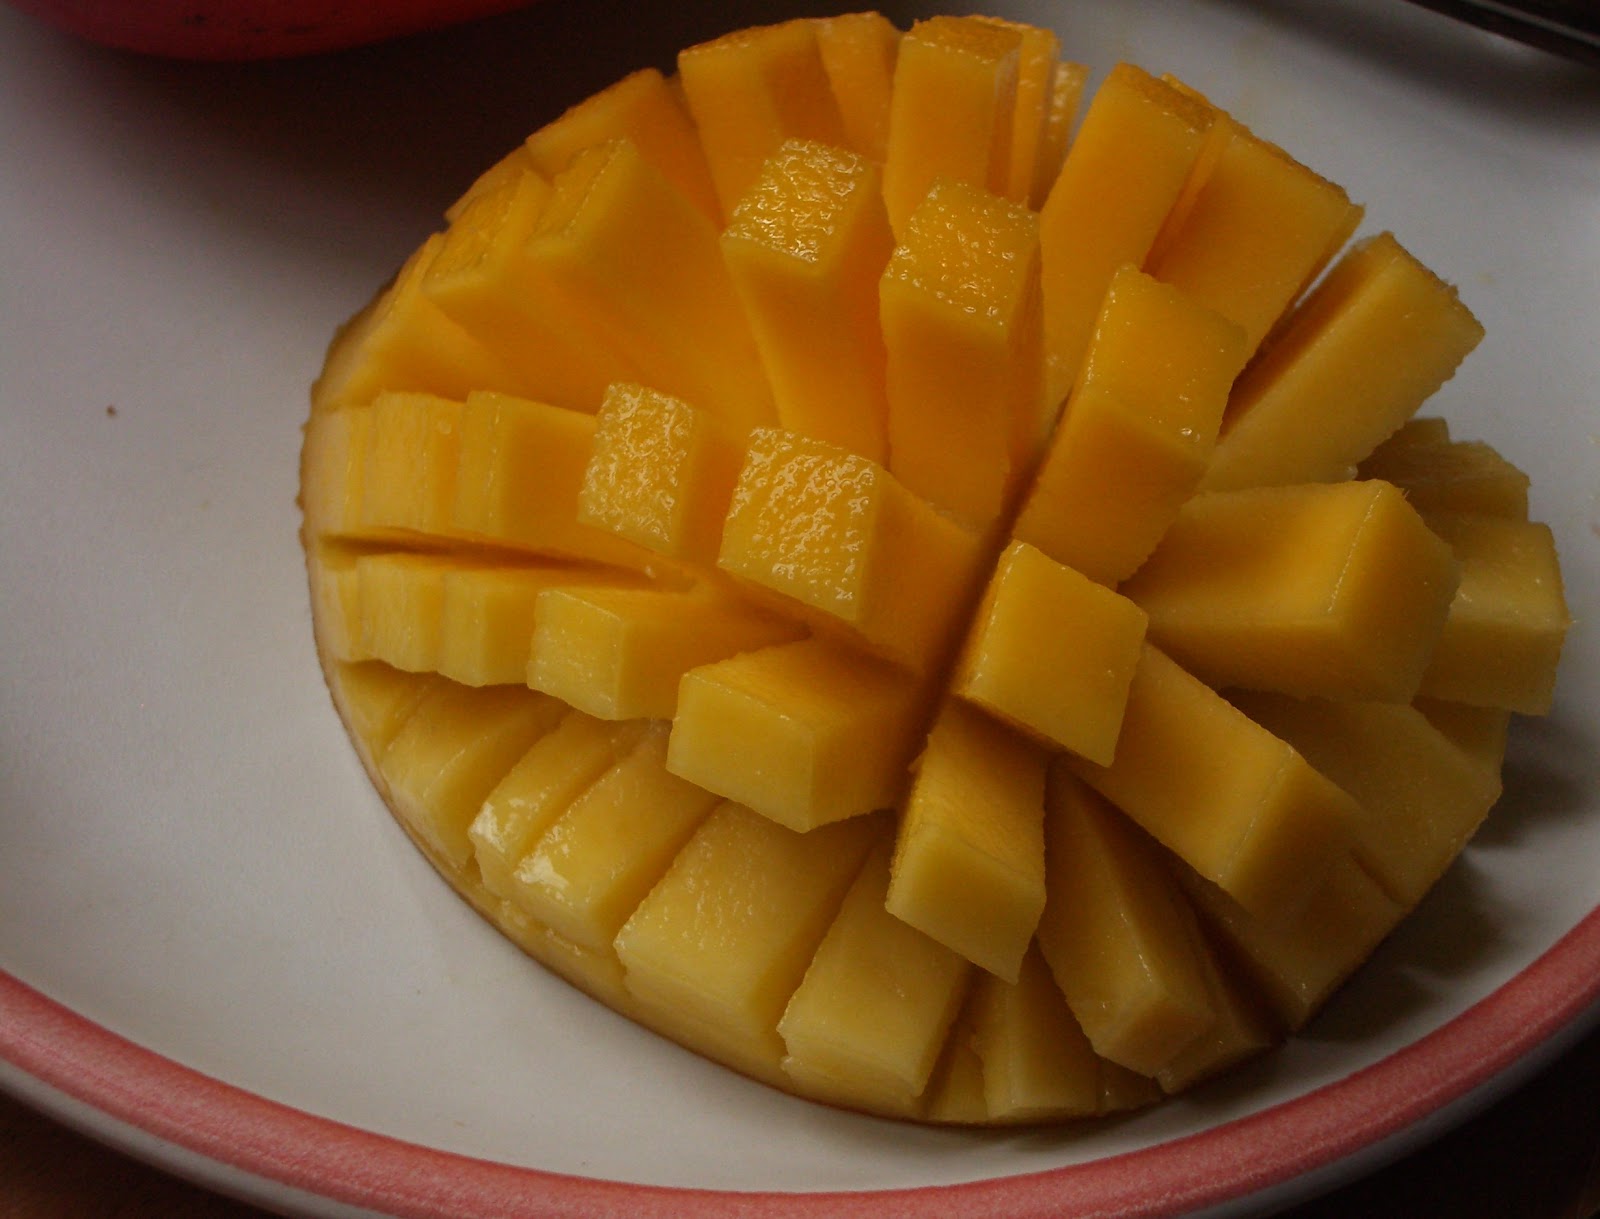 A halved, inside-out mango is